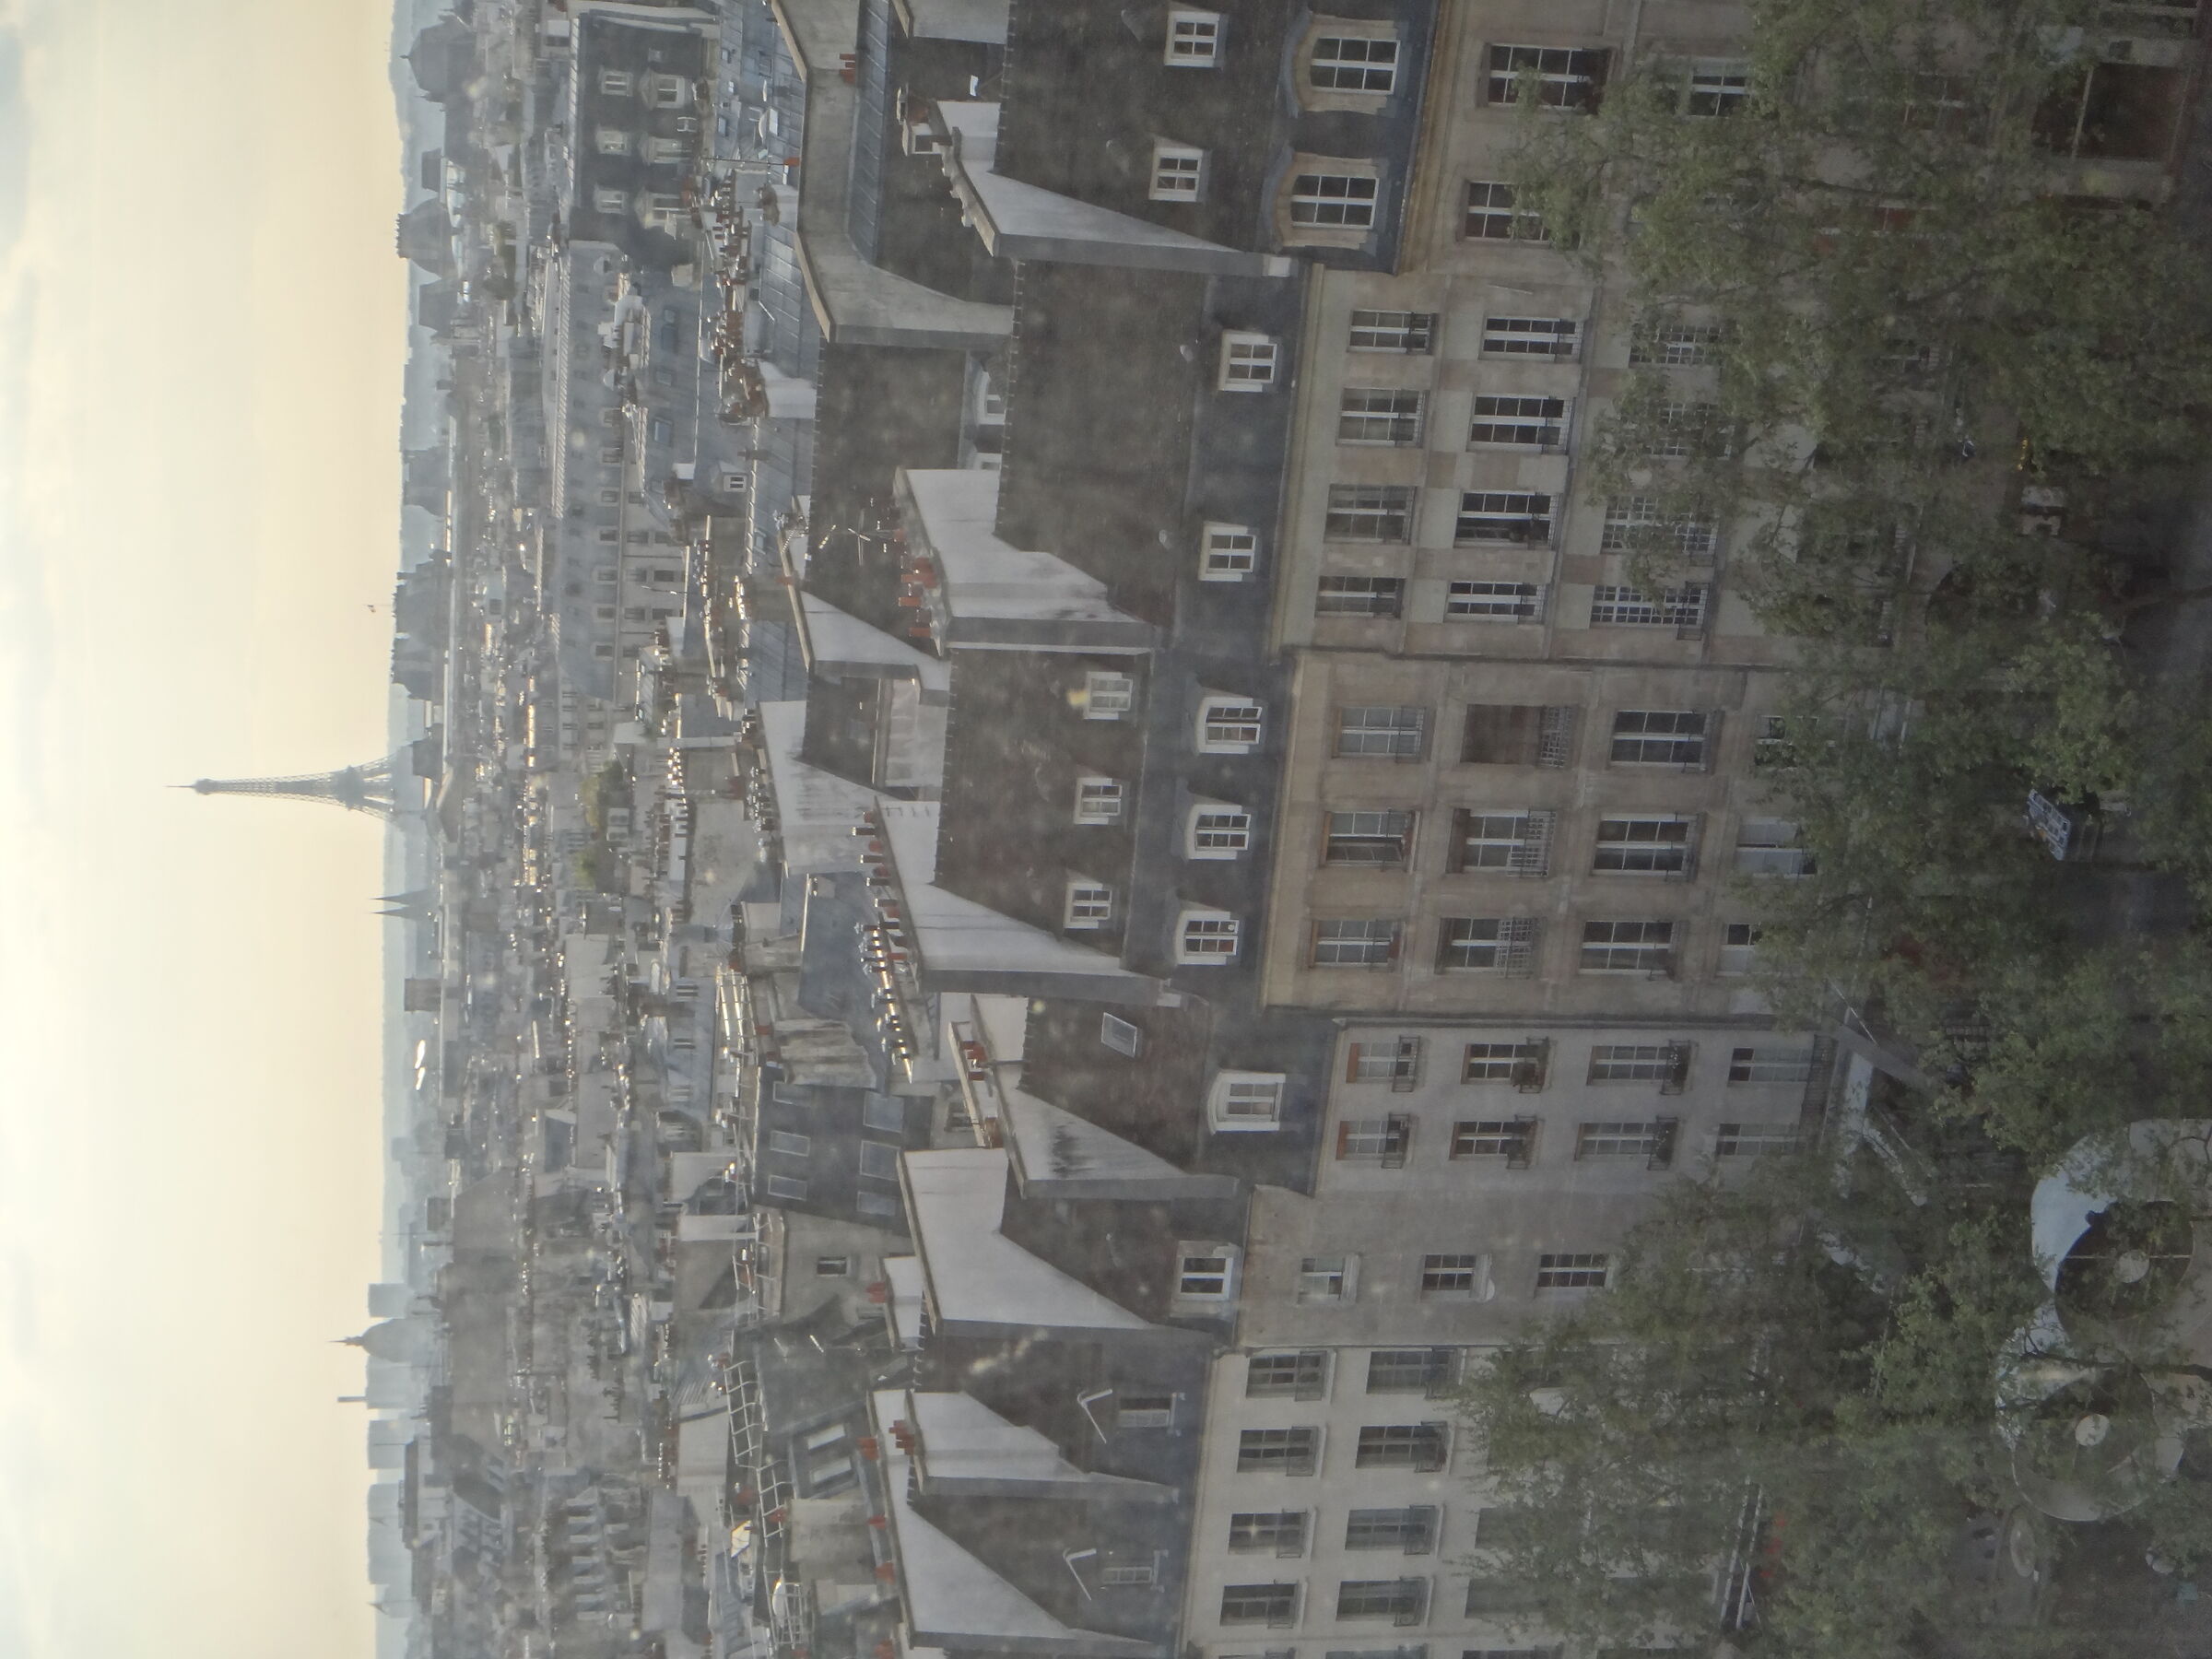 Paris from the Pompidou center tunnel...